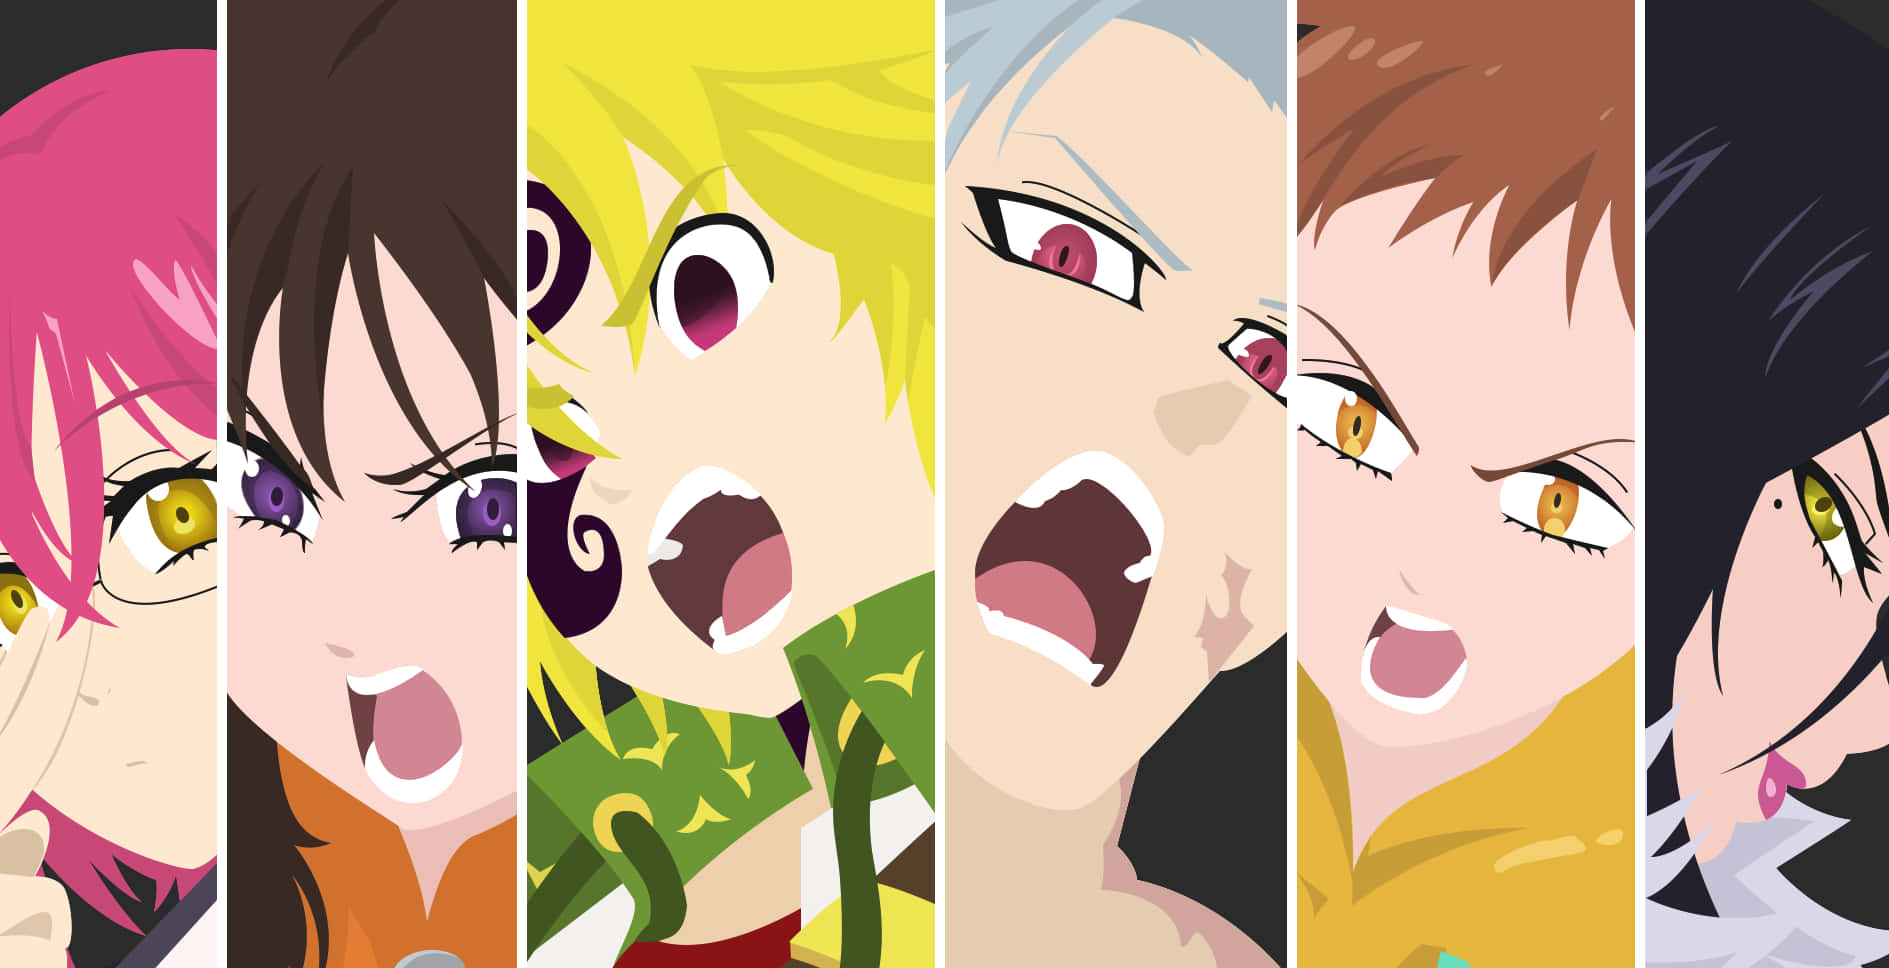 "The Seven Deadly Sins"